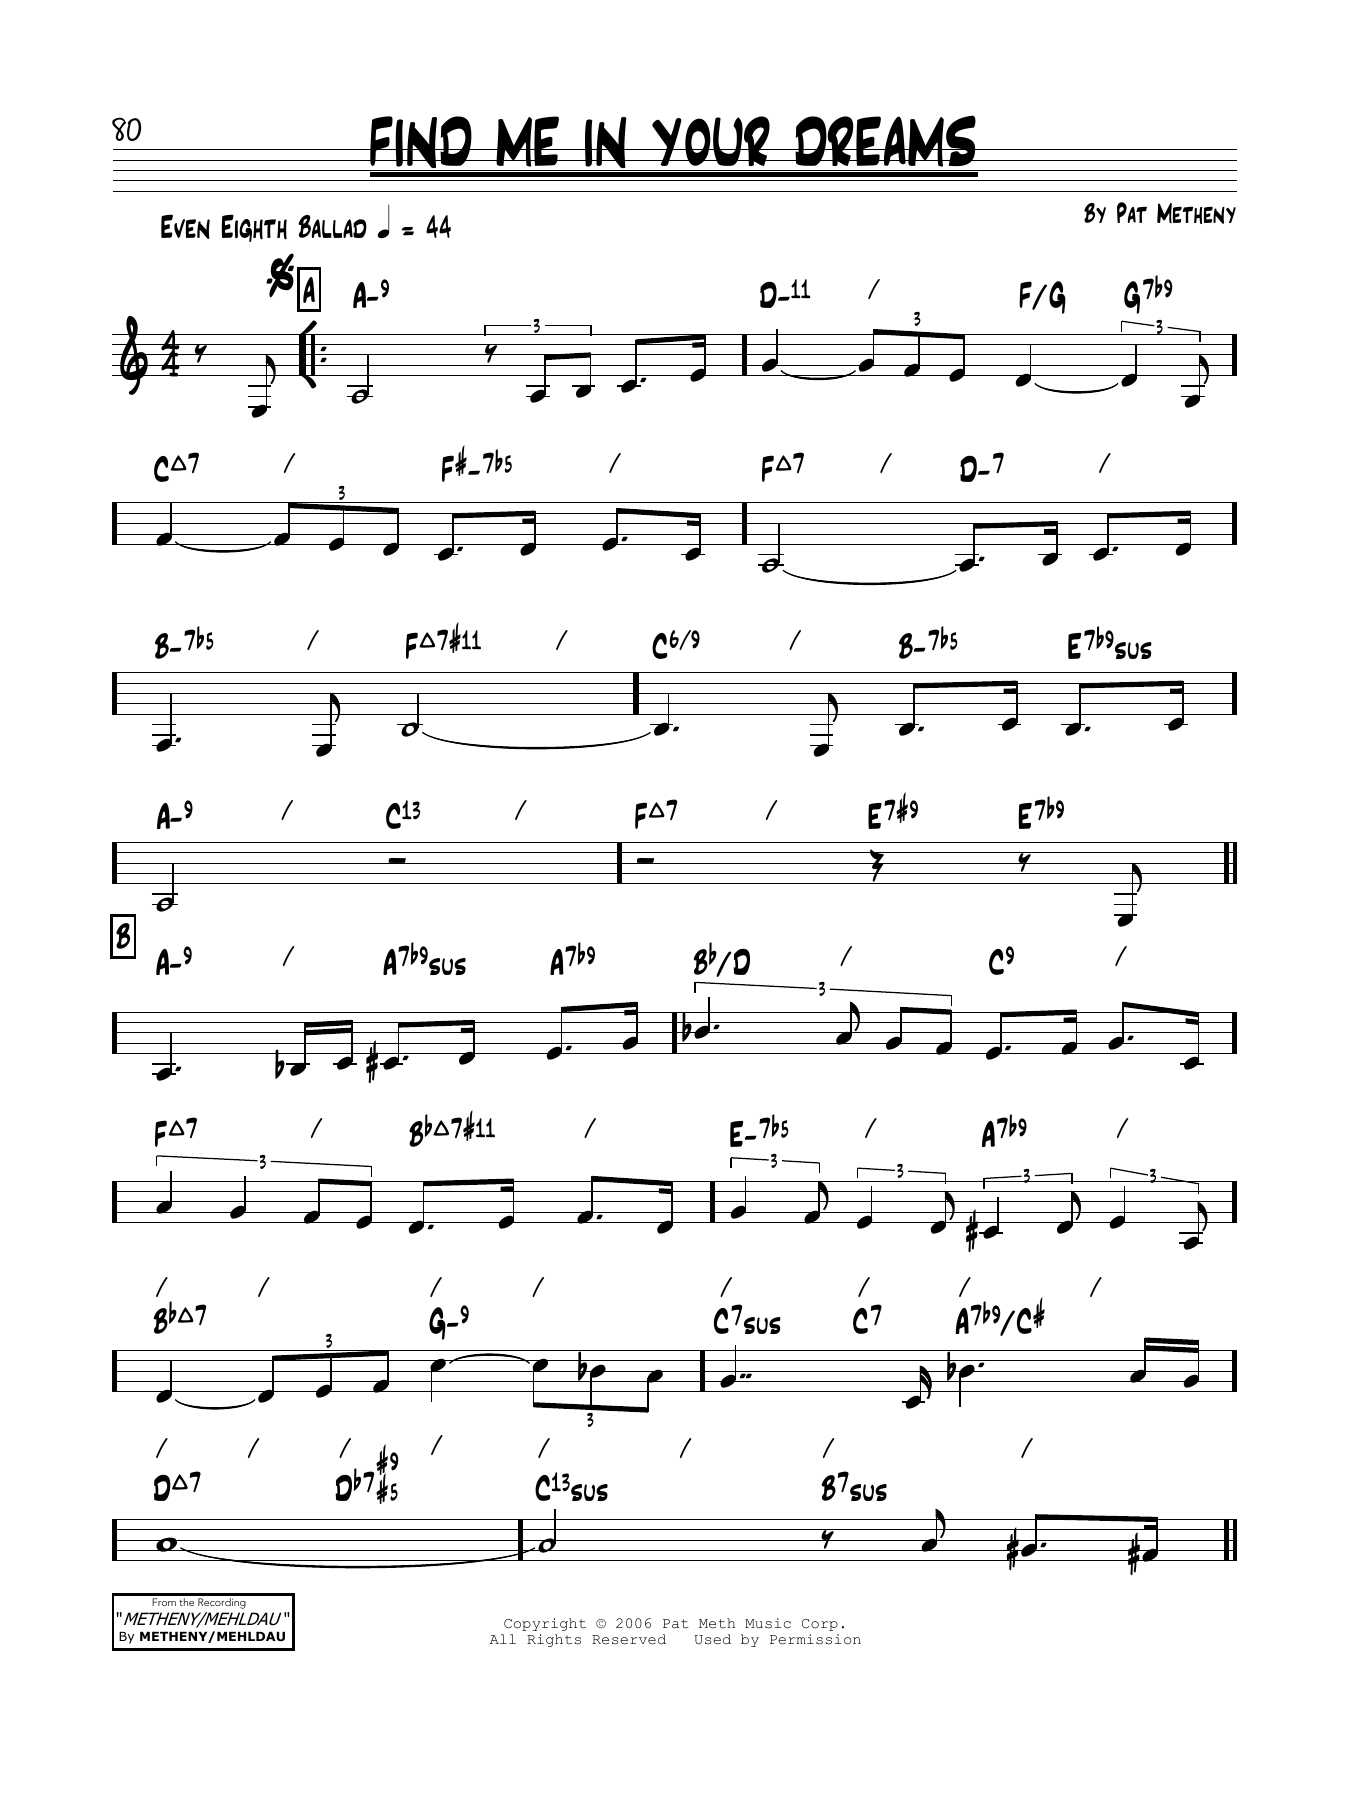 Download Pat Metheny Find Me In Your Dreams Sheet Music